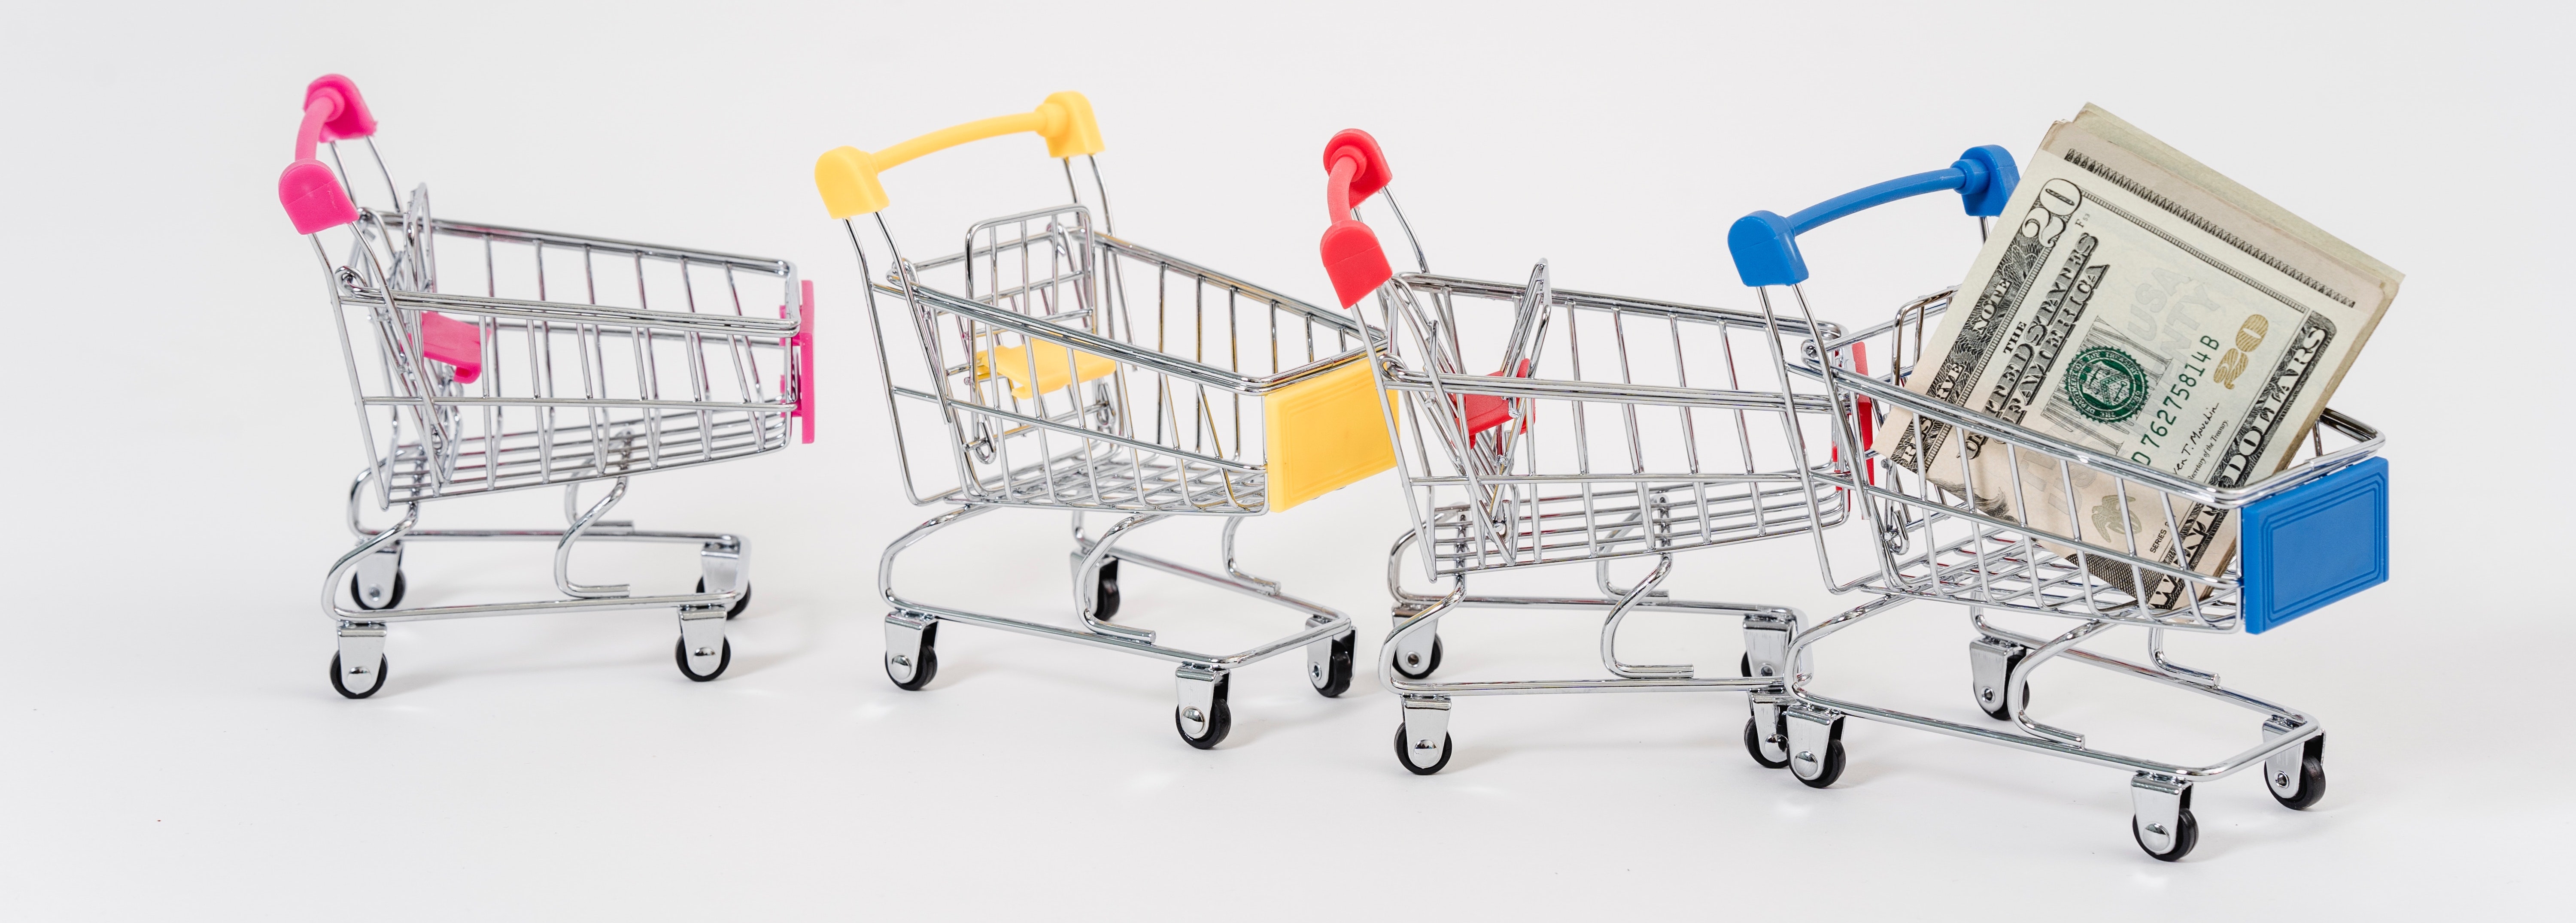 Mini shopping carts on a blank background